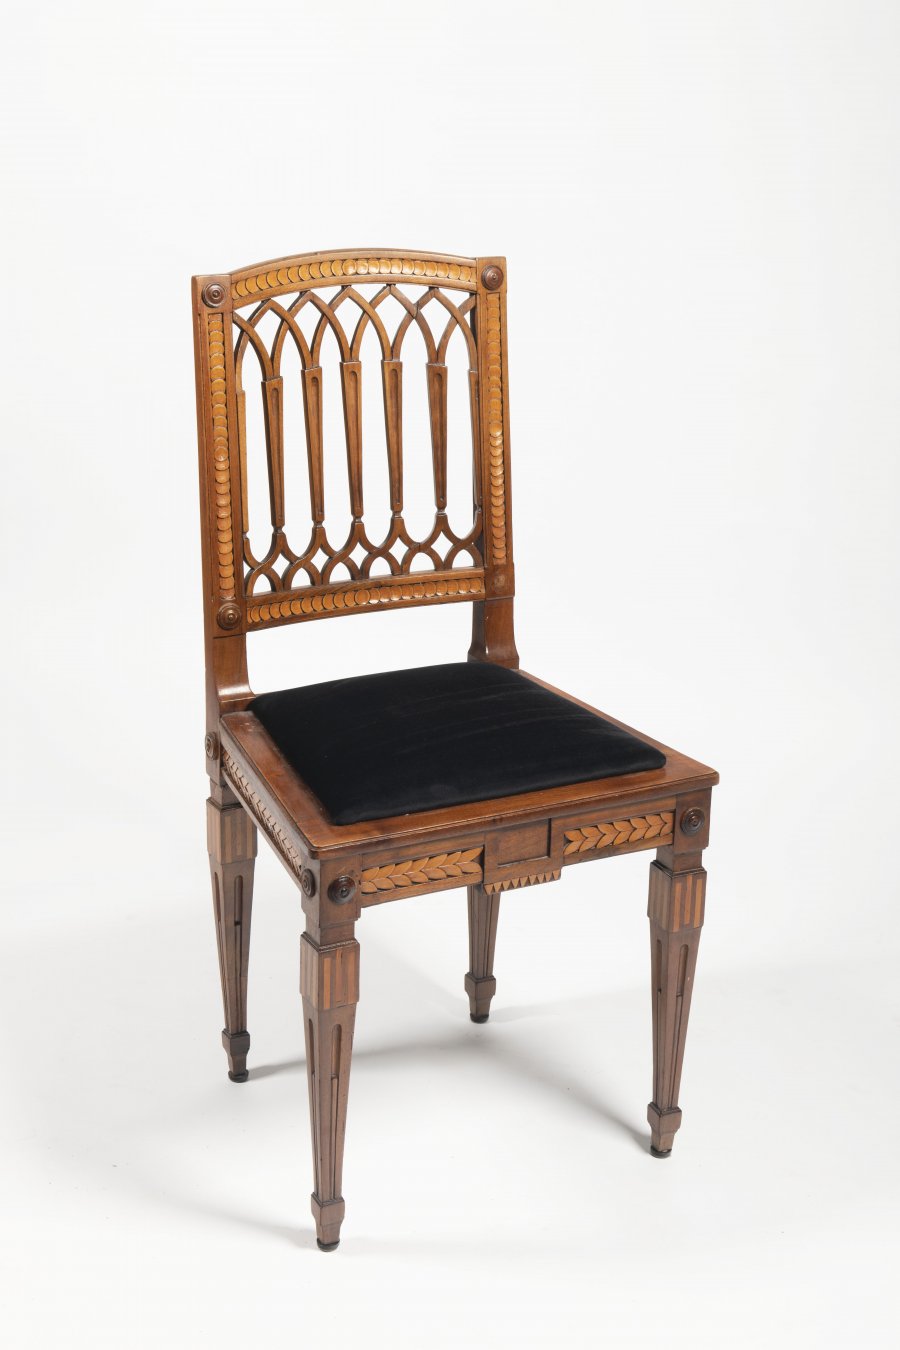 A SET OF FOUR CLASSICAL CHAIRS